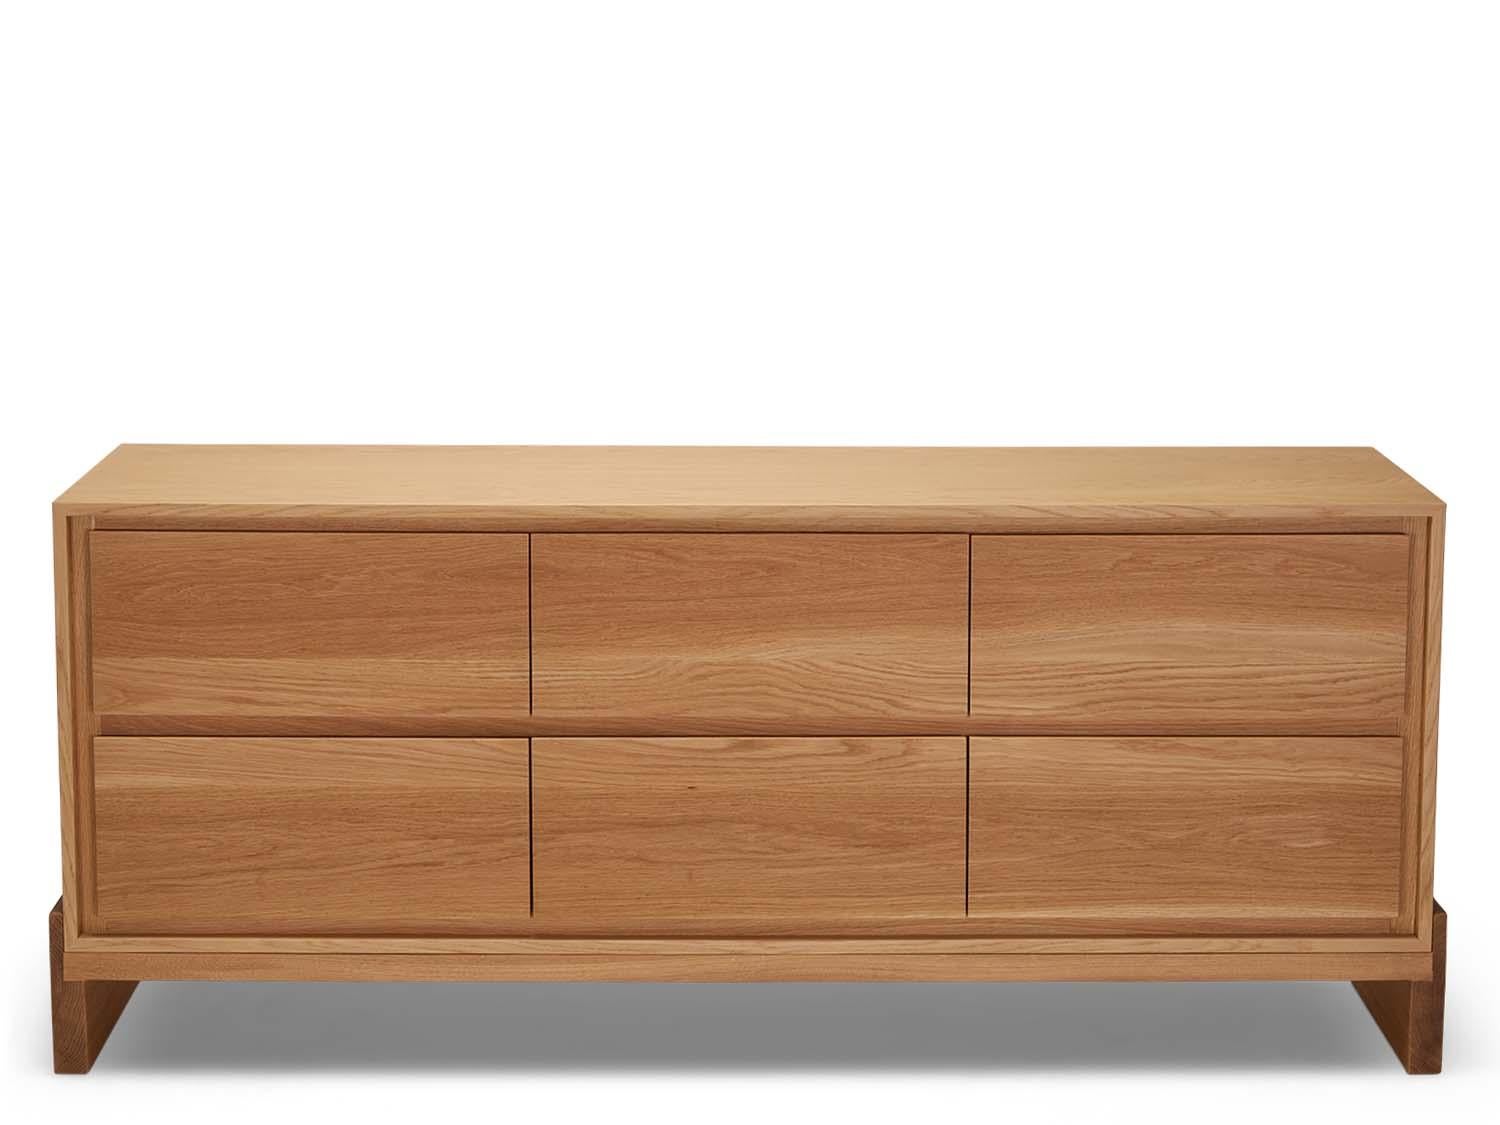 The Platform Chest is a six drawer chest with a solid American walnut or white oak front and base, with scribed drawers.

The Lawson-Fenning Collection is designed and handmade in Los Angeles, California. Reach out to discover what options are